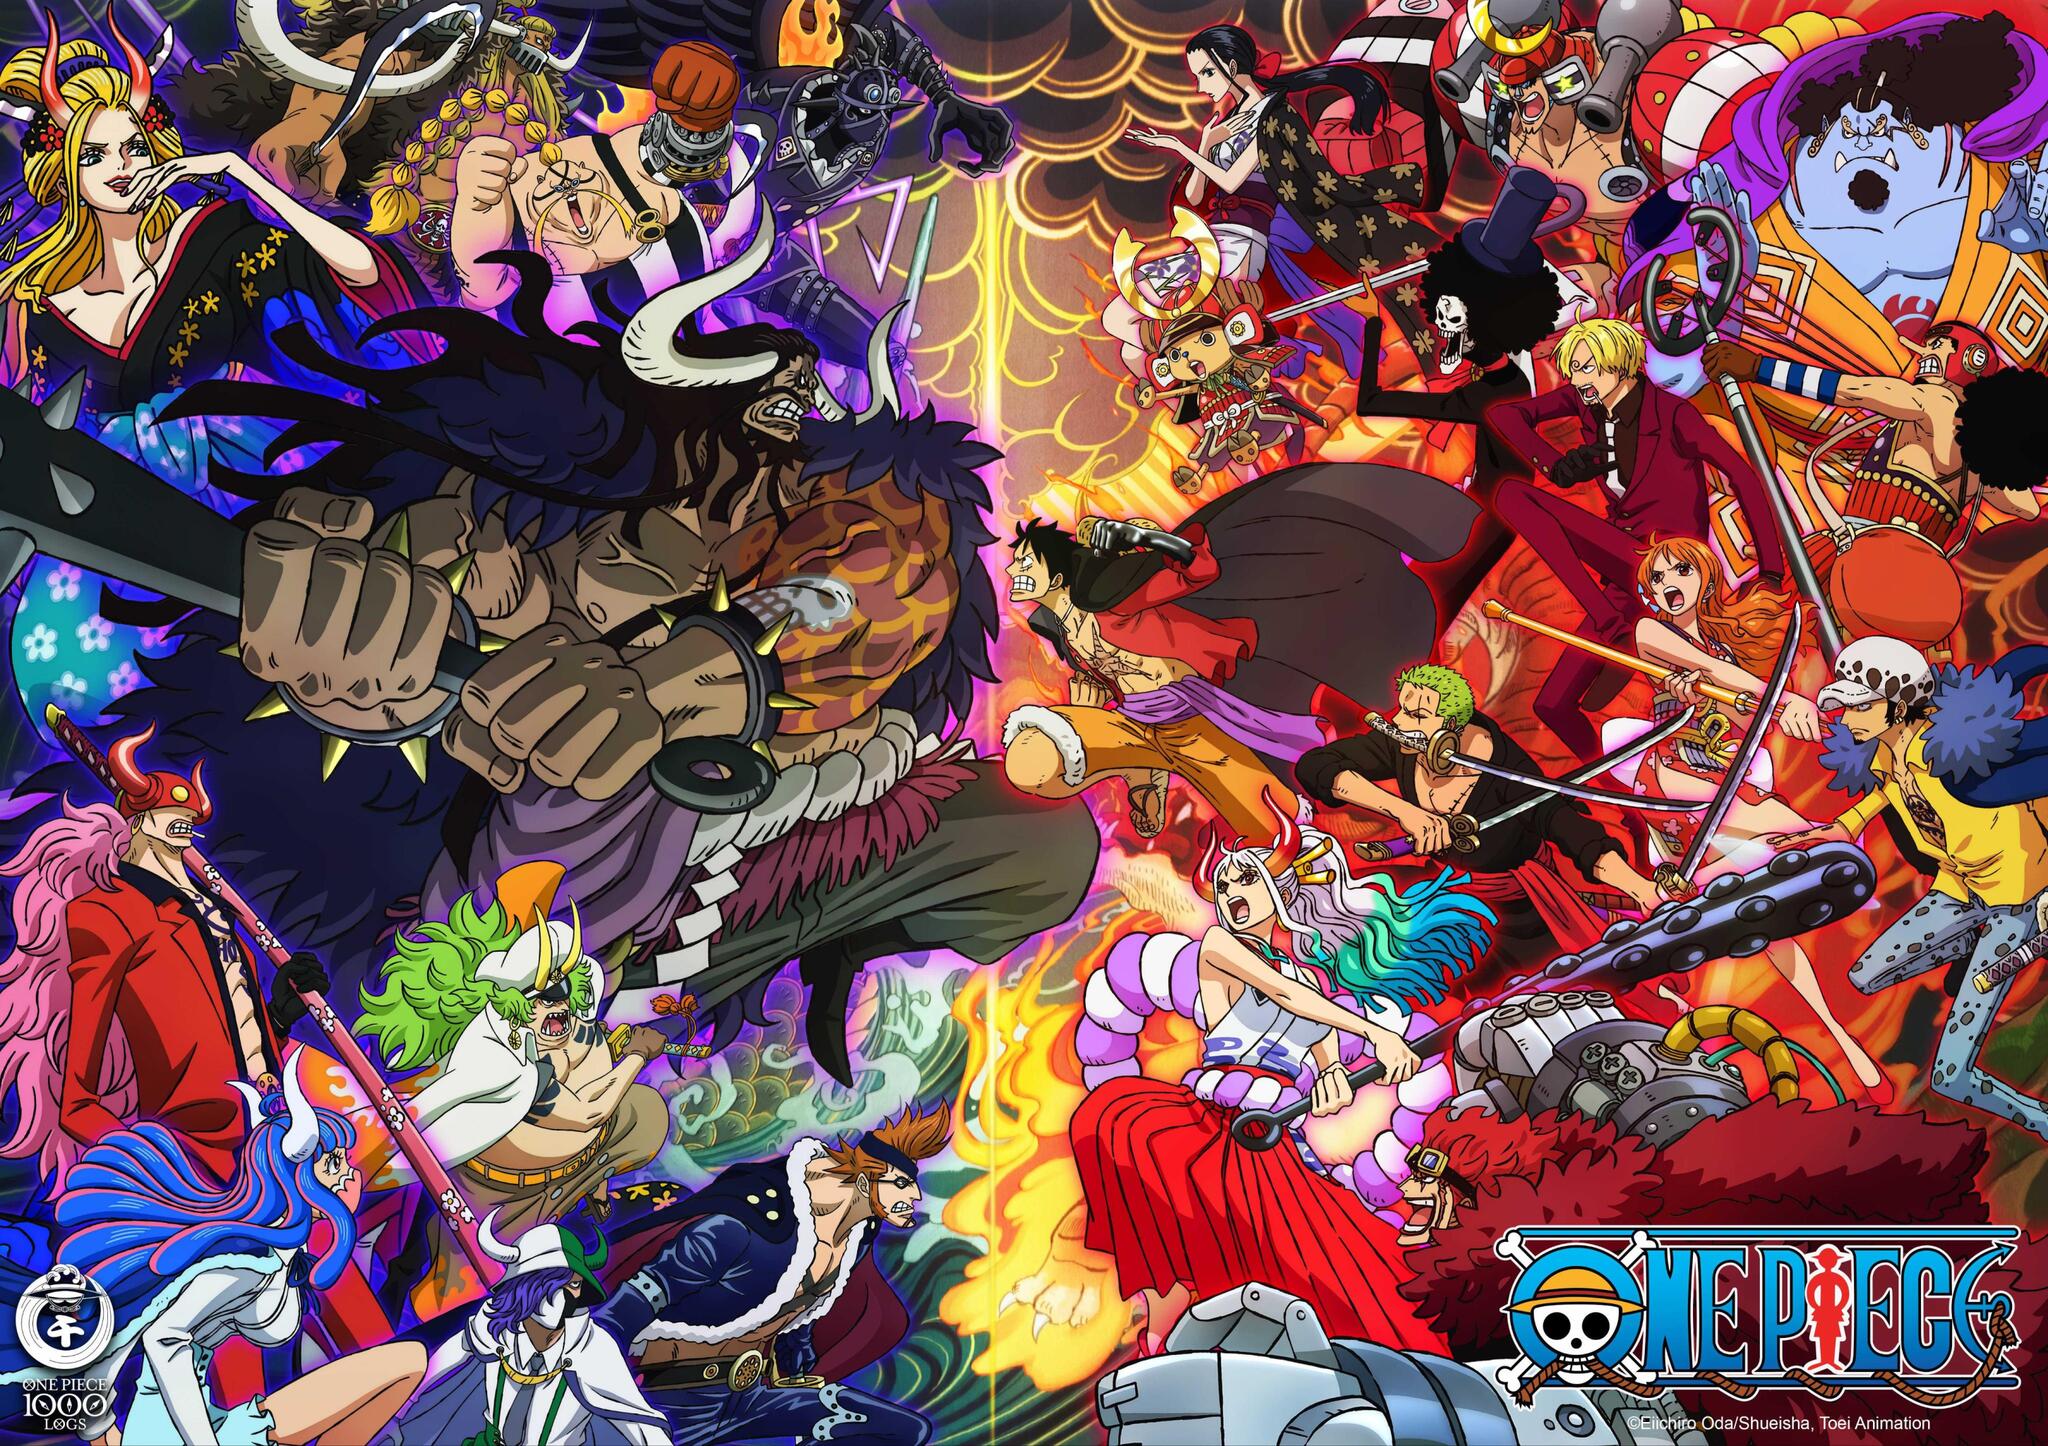 How To Watch One Piece Where To Stream 1 000th Episode Time Platform Pennlive Com